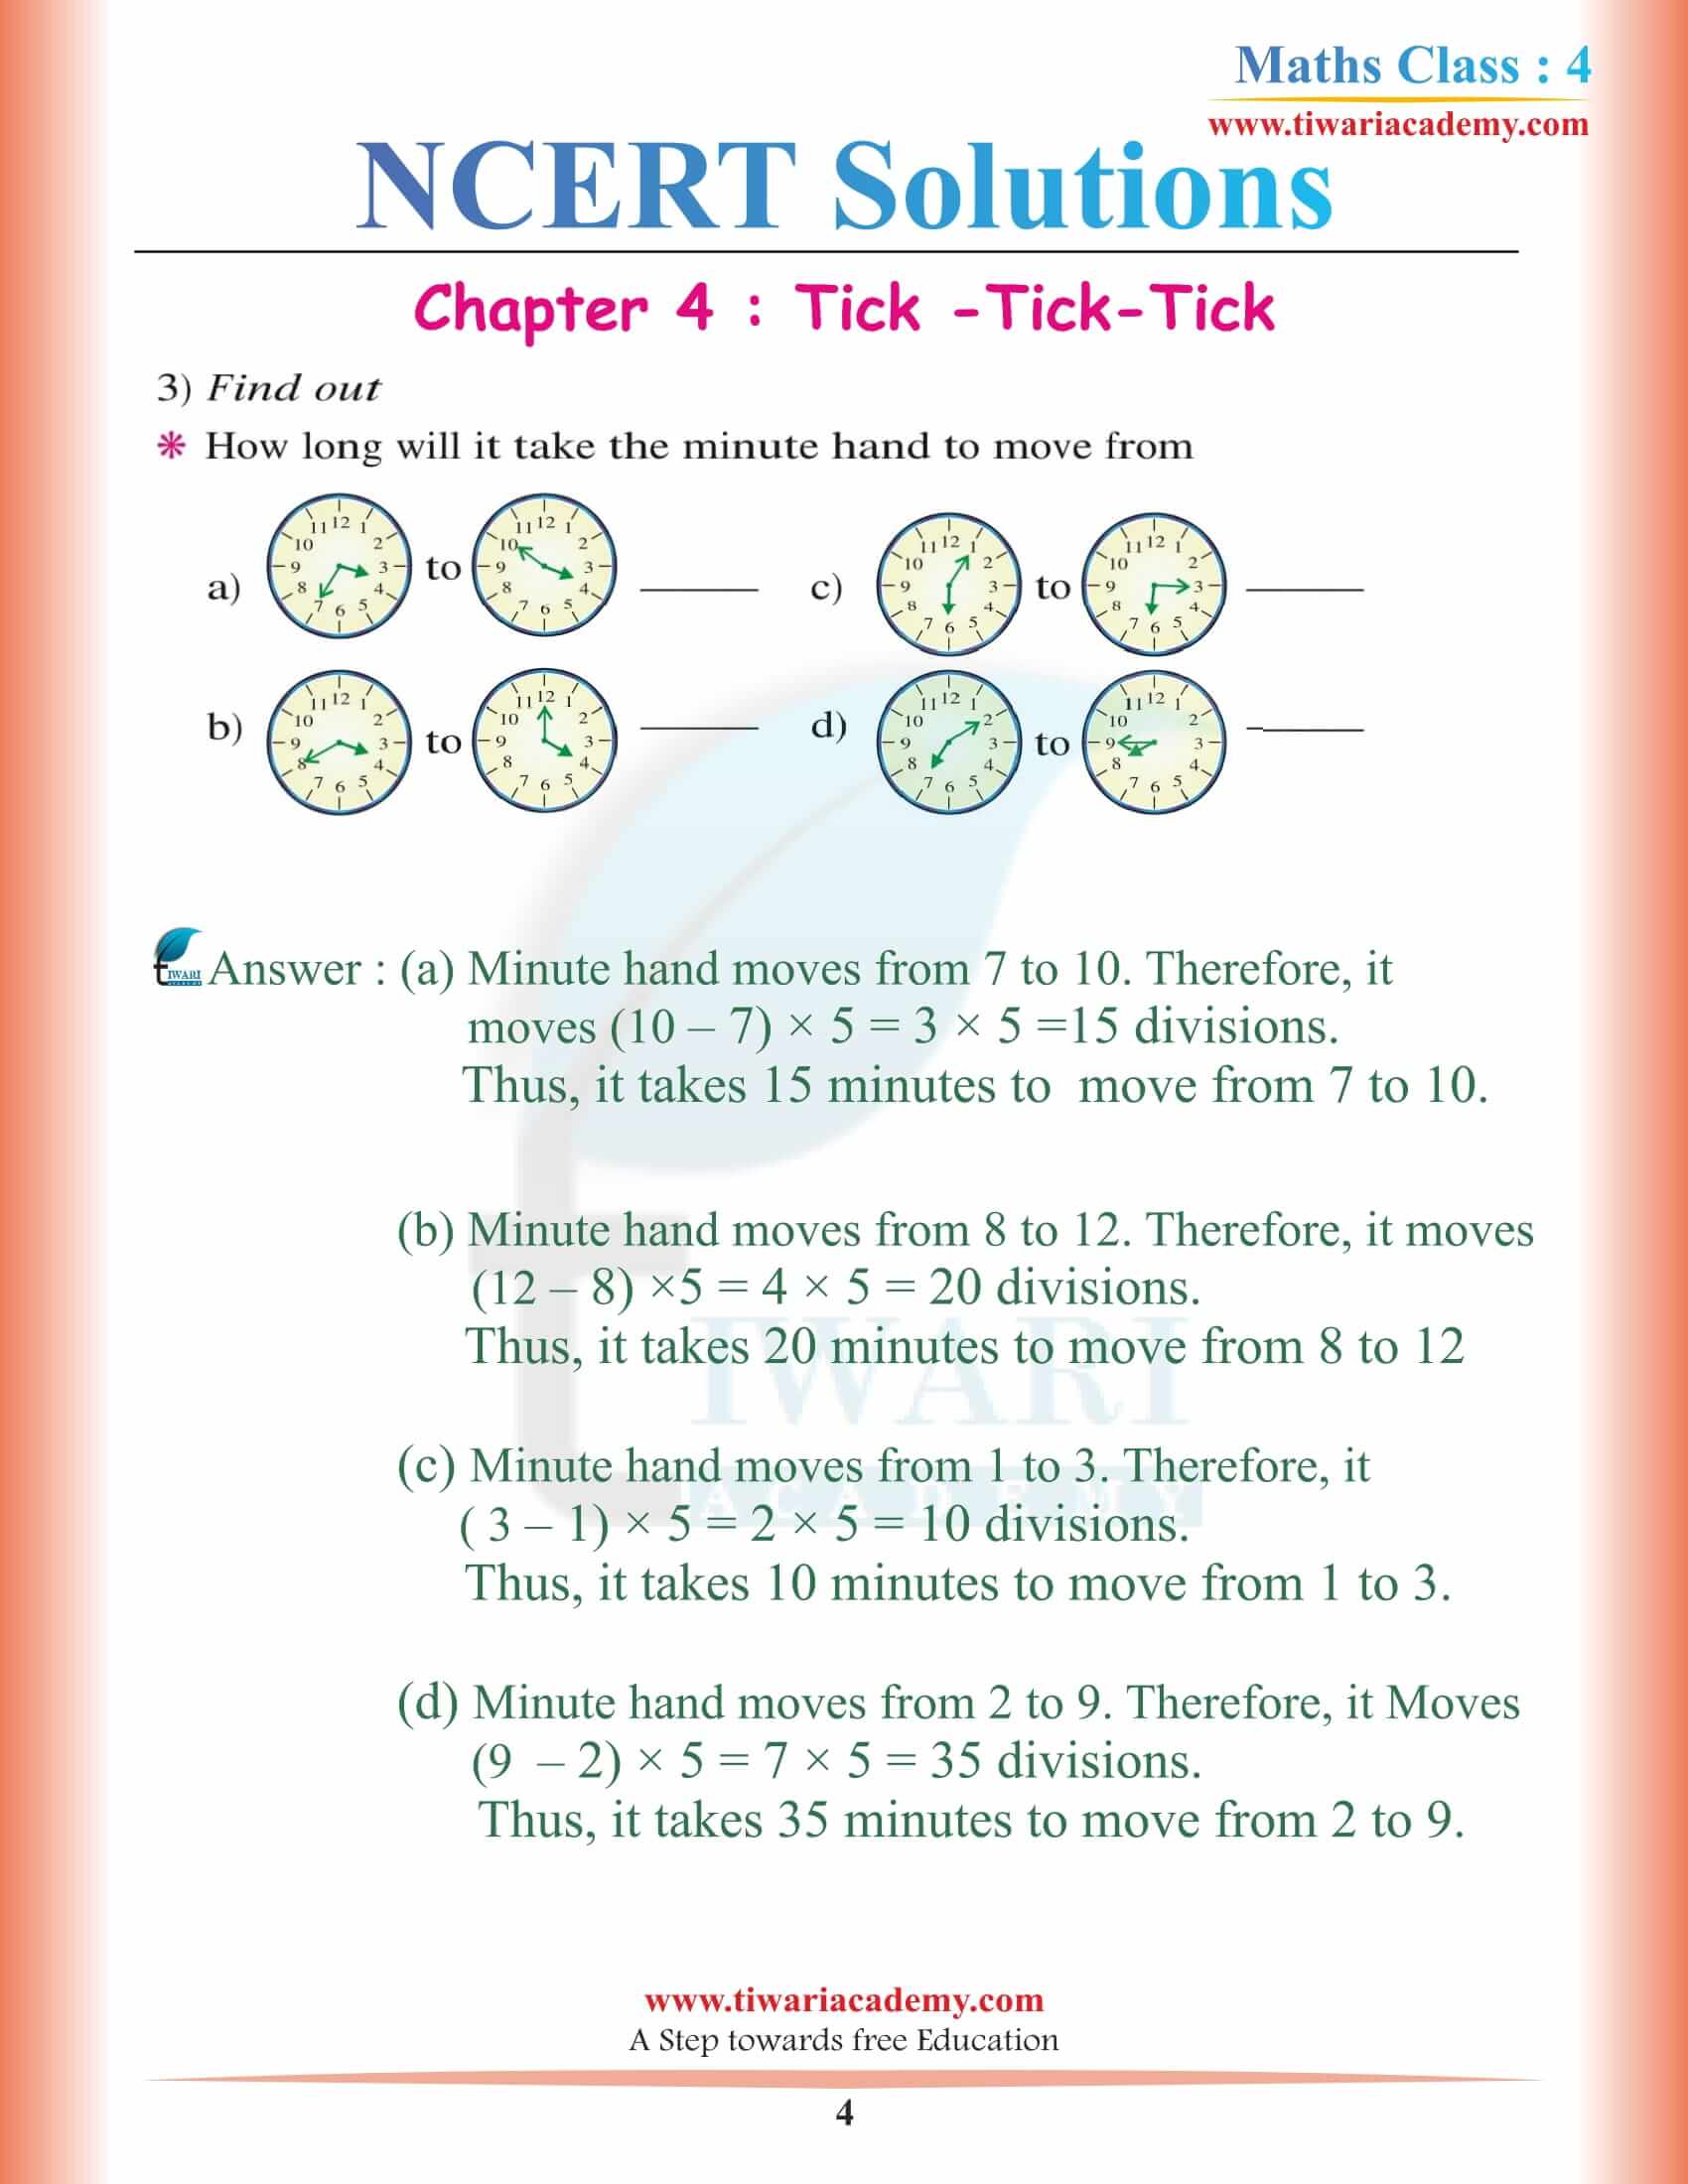 NCERT Solutions for Class 4 Maths Chapter 4 in English Medium